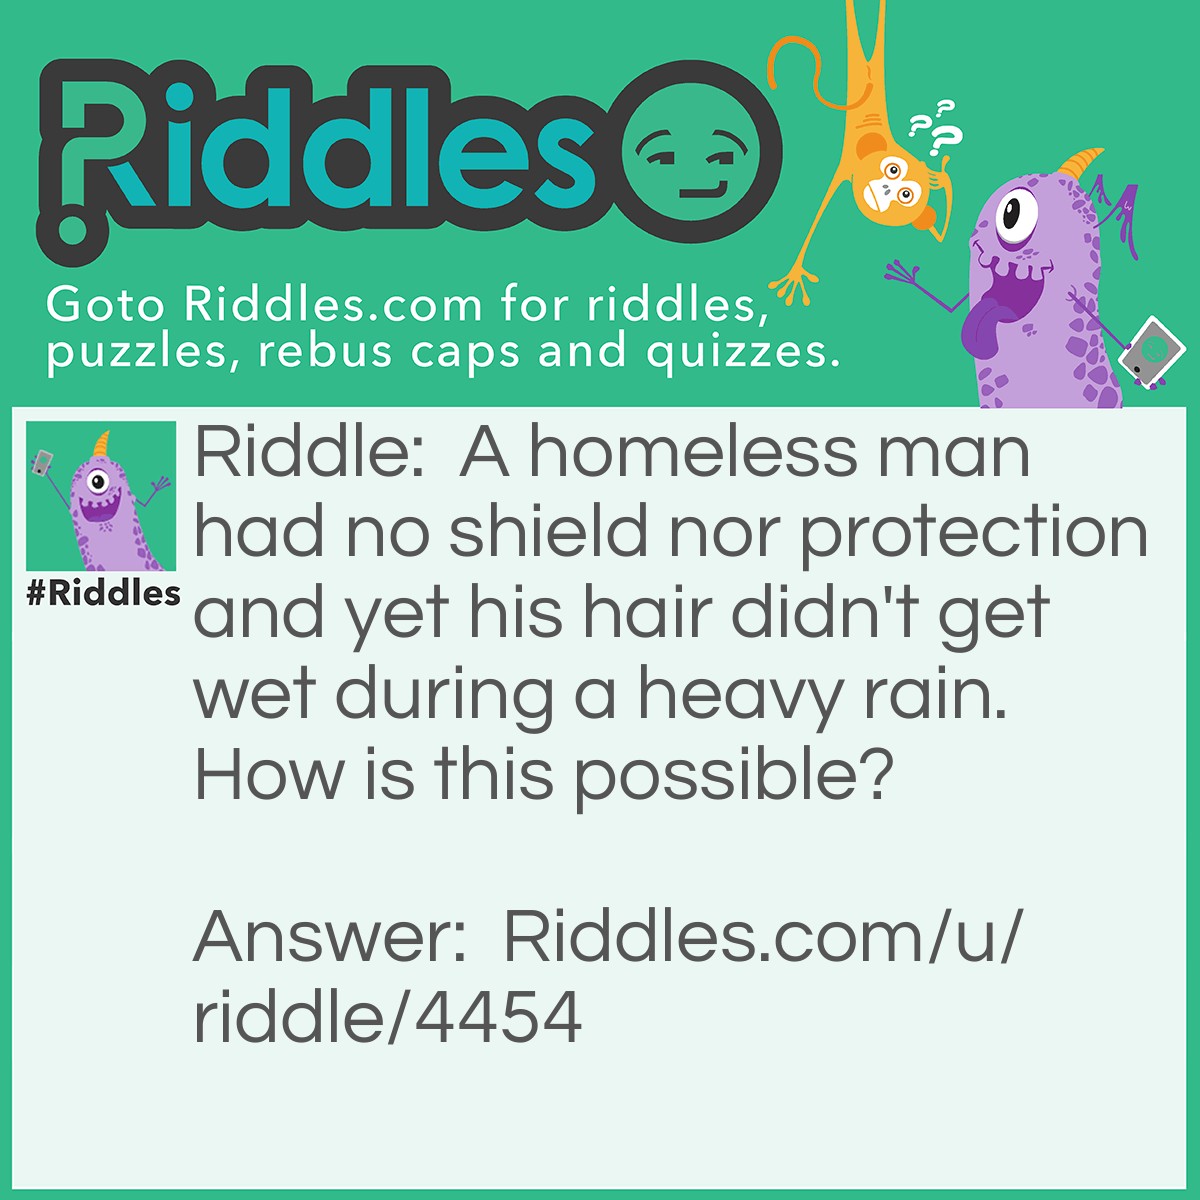 Riddle: A homeless man had no shield nor protection and yet his hair didn't get wet during a heavy rain. How is this possible? Answer: The man is bald!